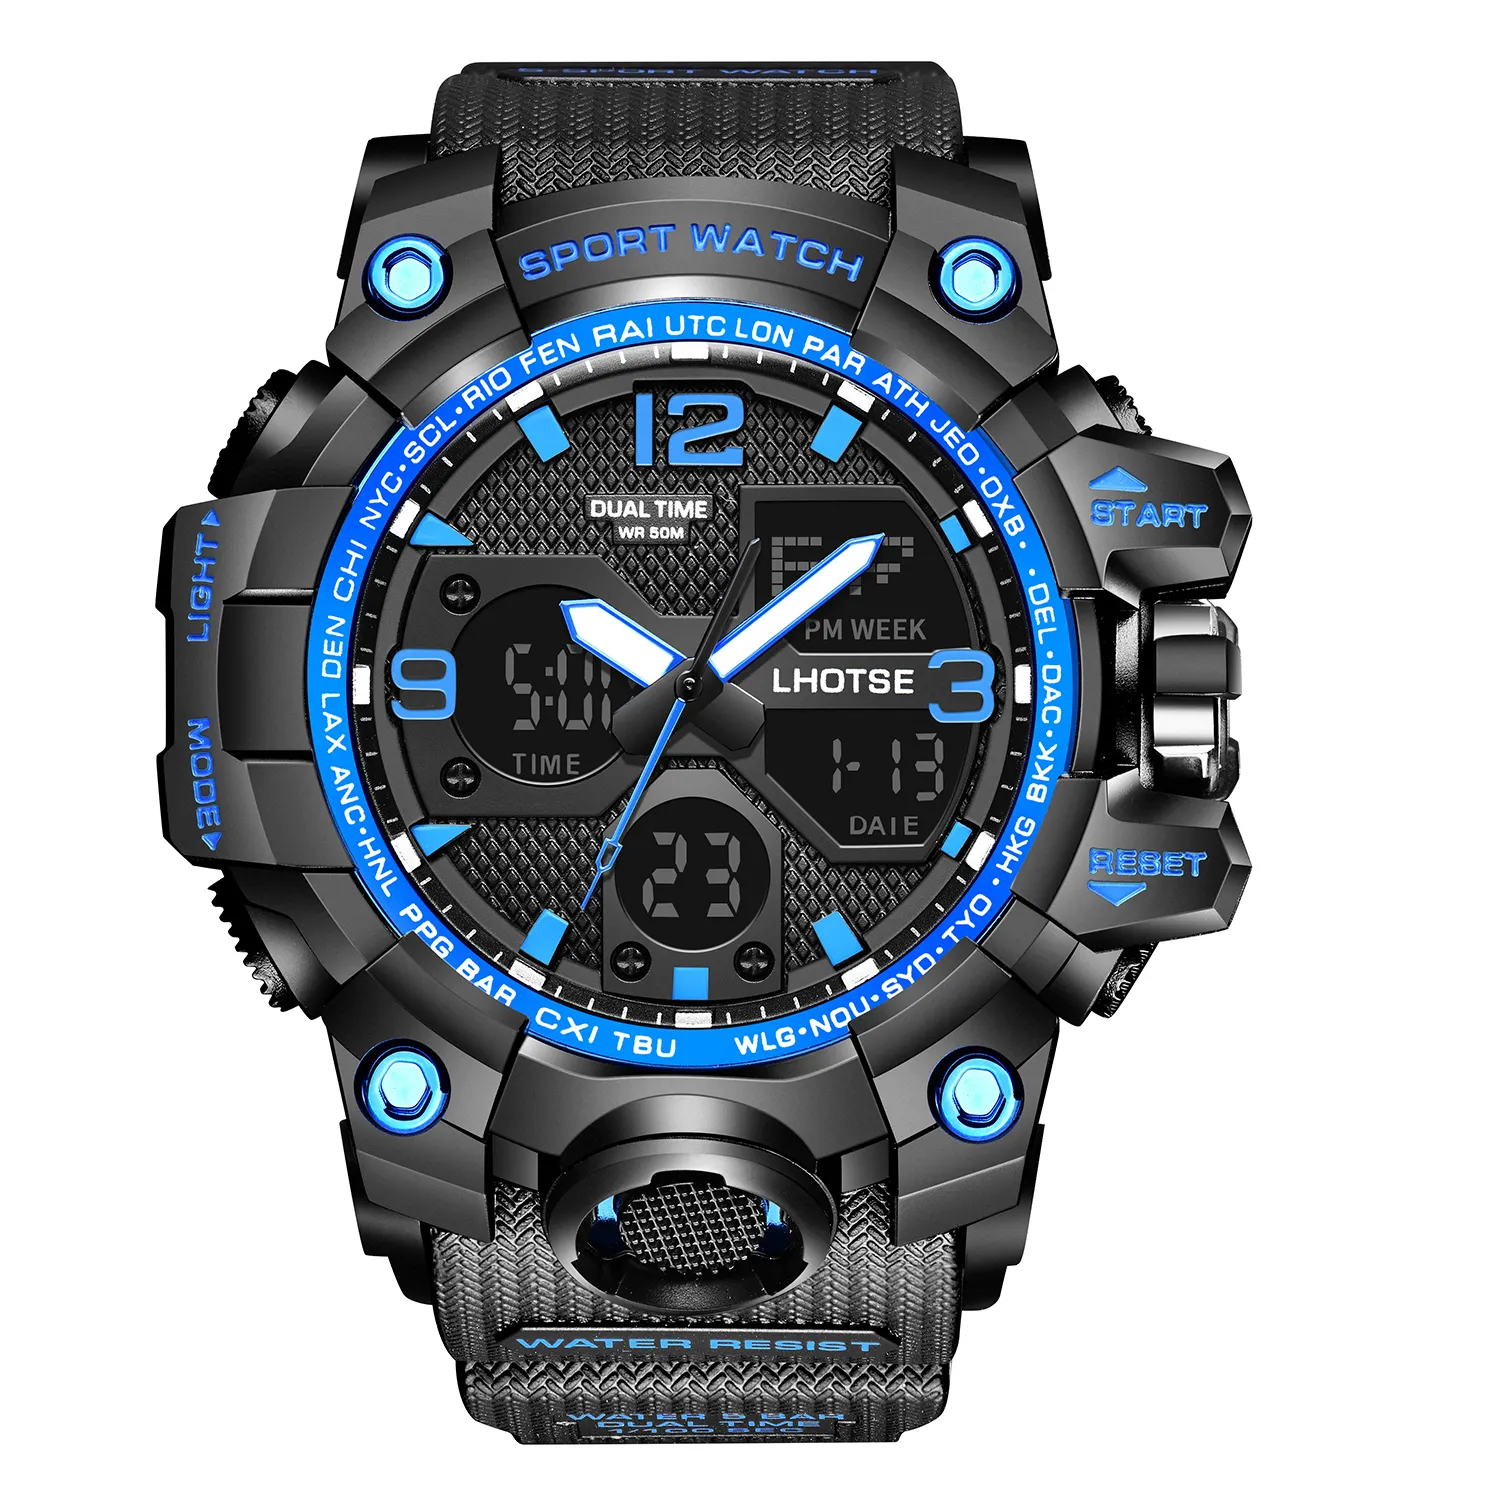 LHOTSE 3003 Best selling products analog digital outdoor sport watches style relojes deportivos hombre watch mens